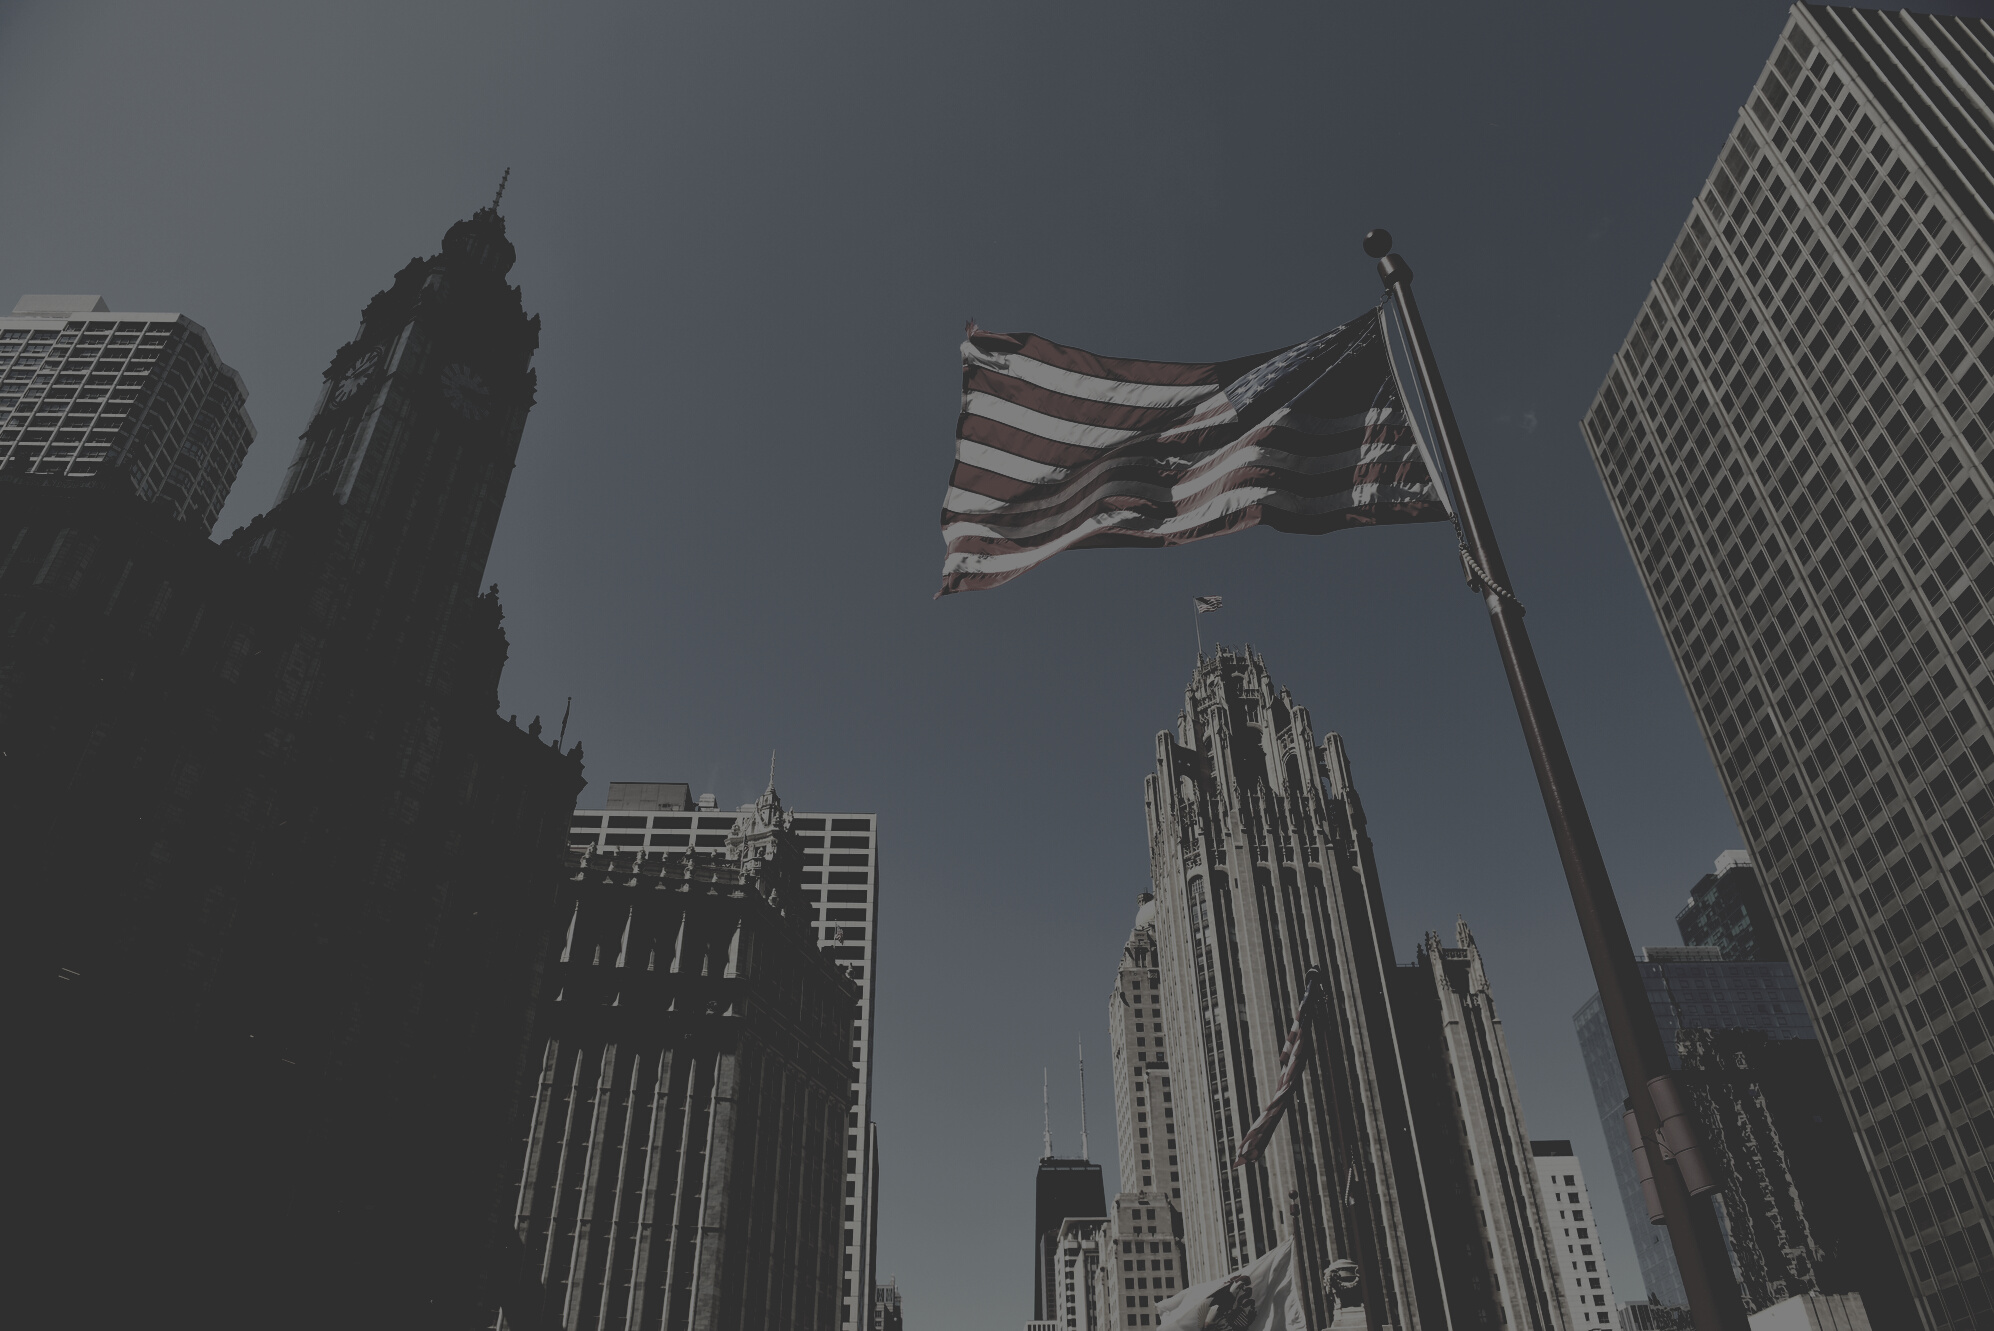 American Flag Waving in Downtown Chicago, USA